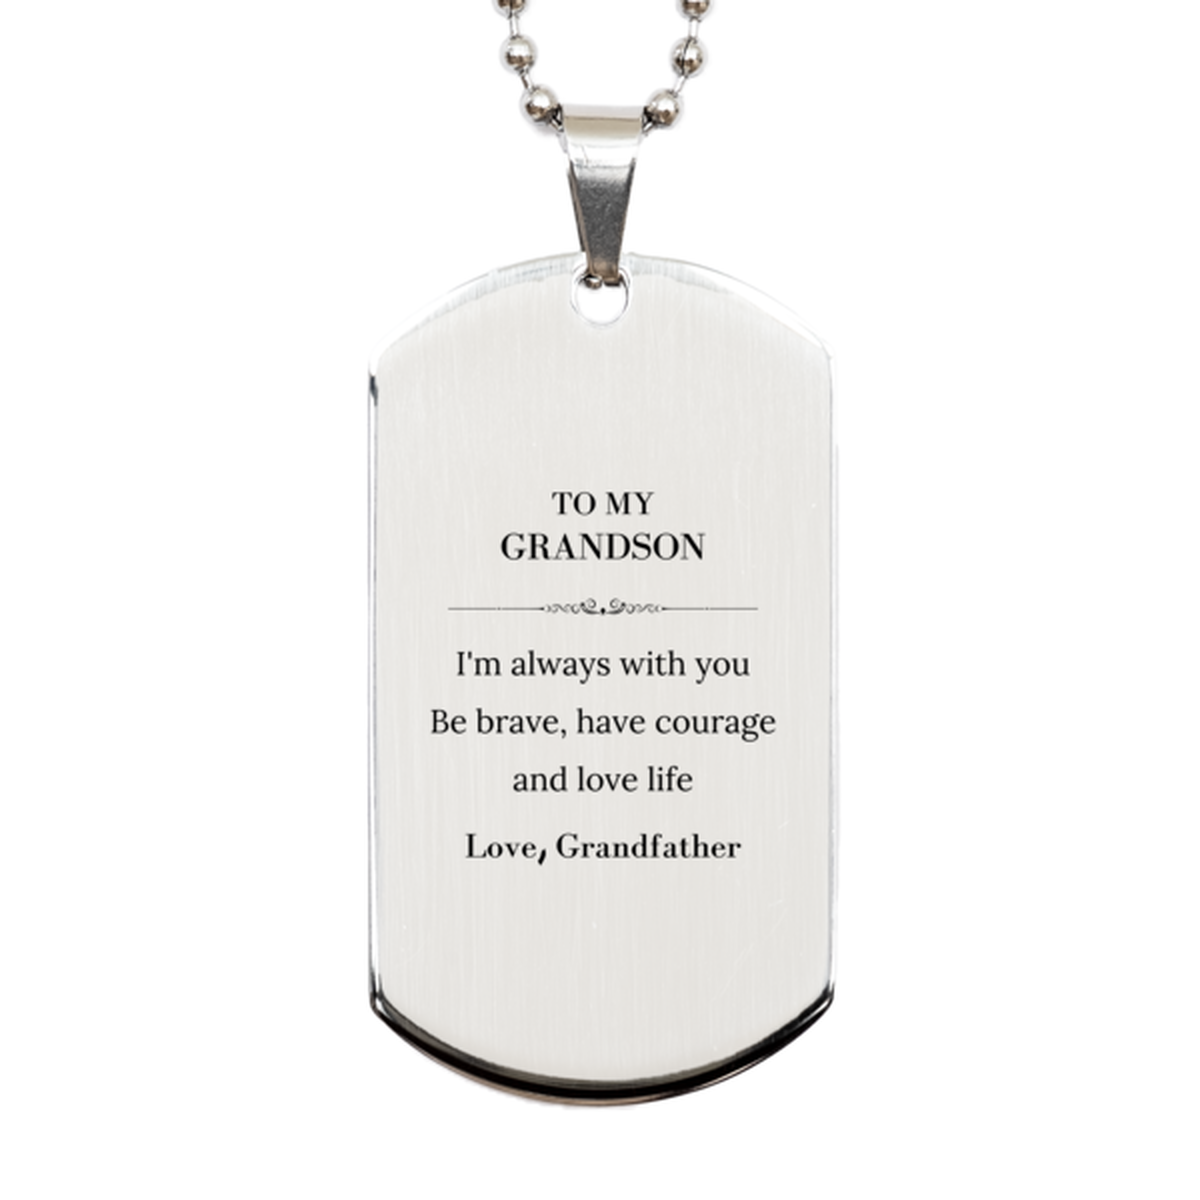 To My Grandson Gifts from Grandfather, Unique Silver Dog Tag Inspirational Christmas Birthday Graduation Gifts for Grandson I'm always with you. Be brave, have courage and love life. Love, Grandfather